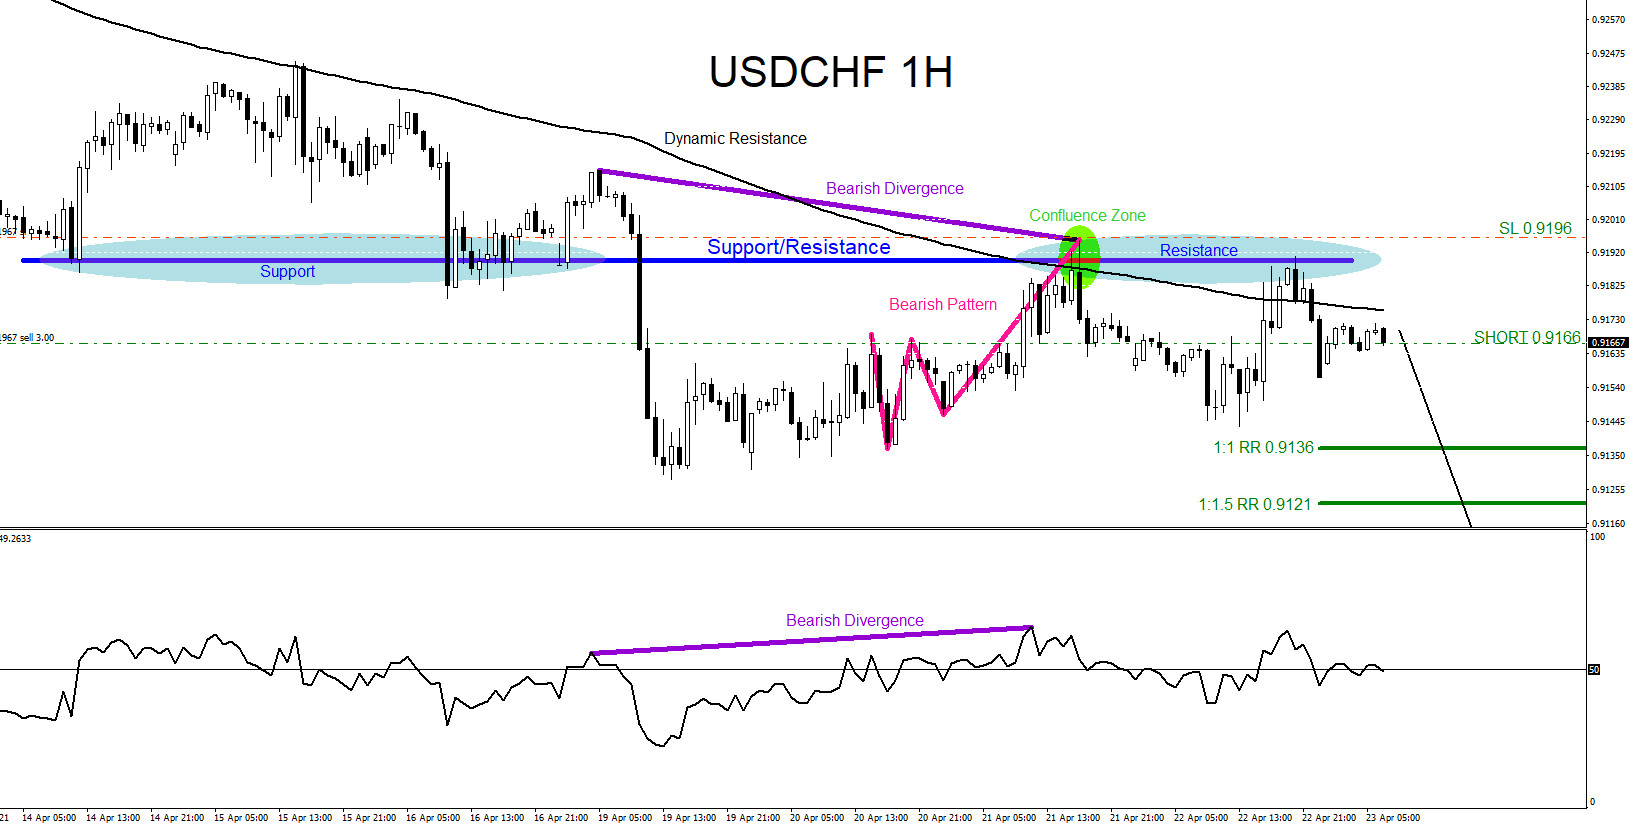 USDCHF : Moves Lower as Expected